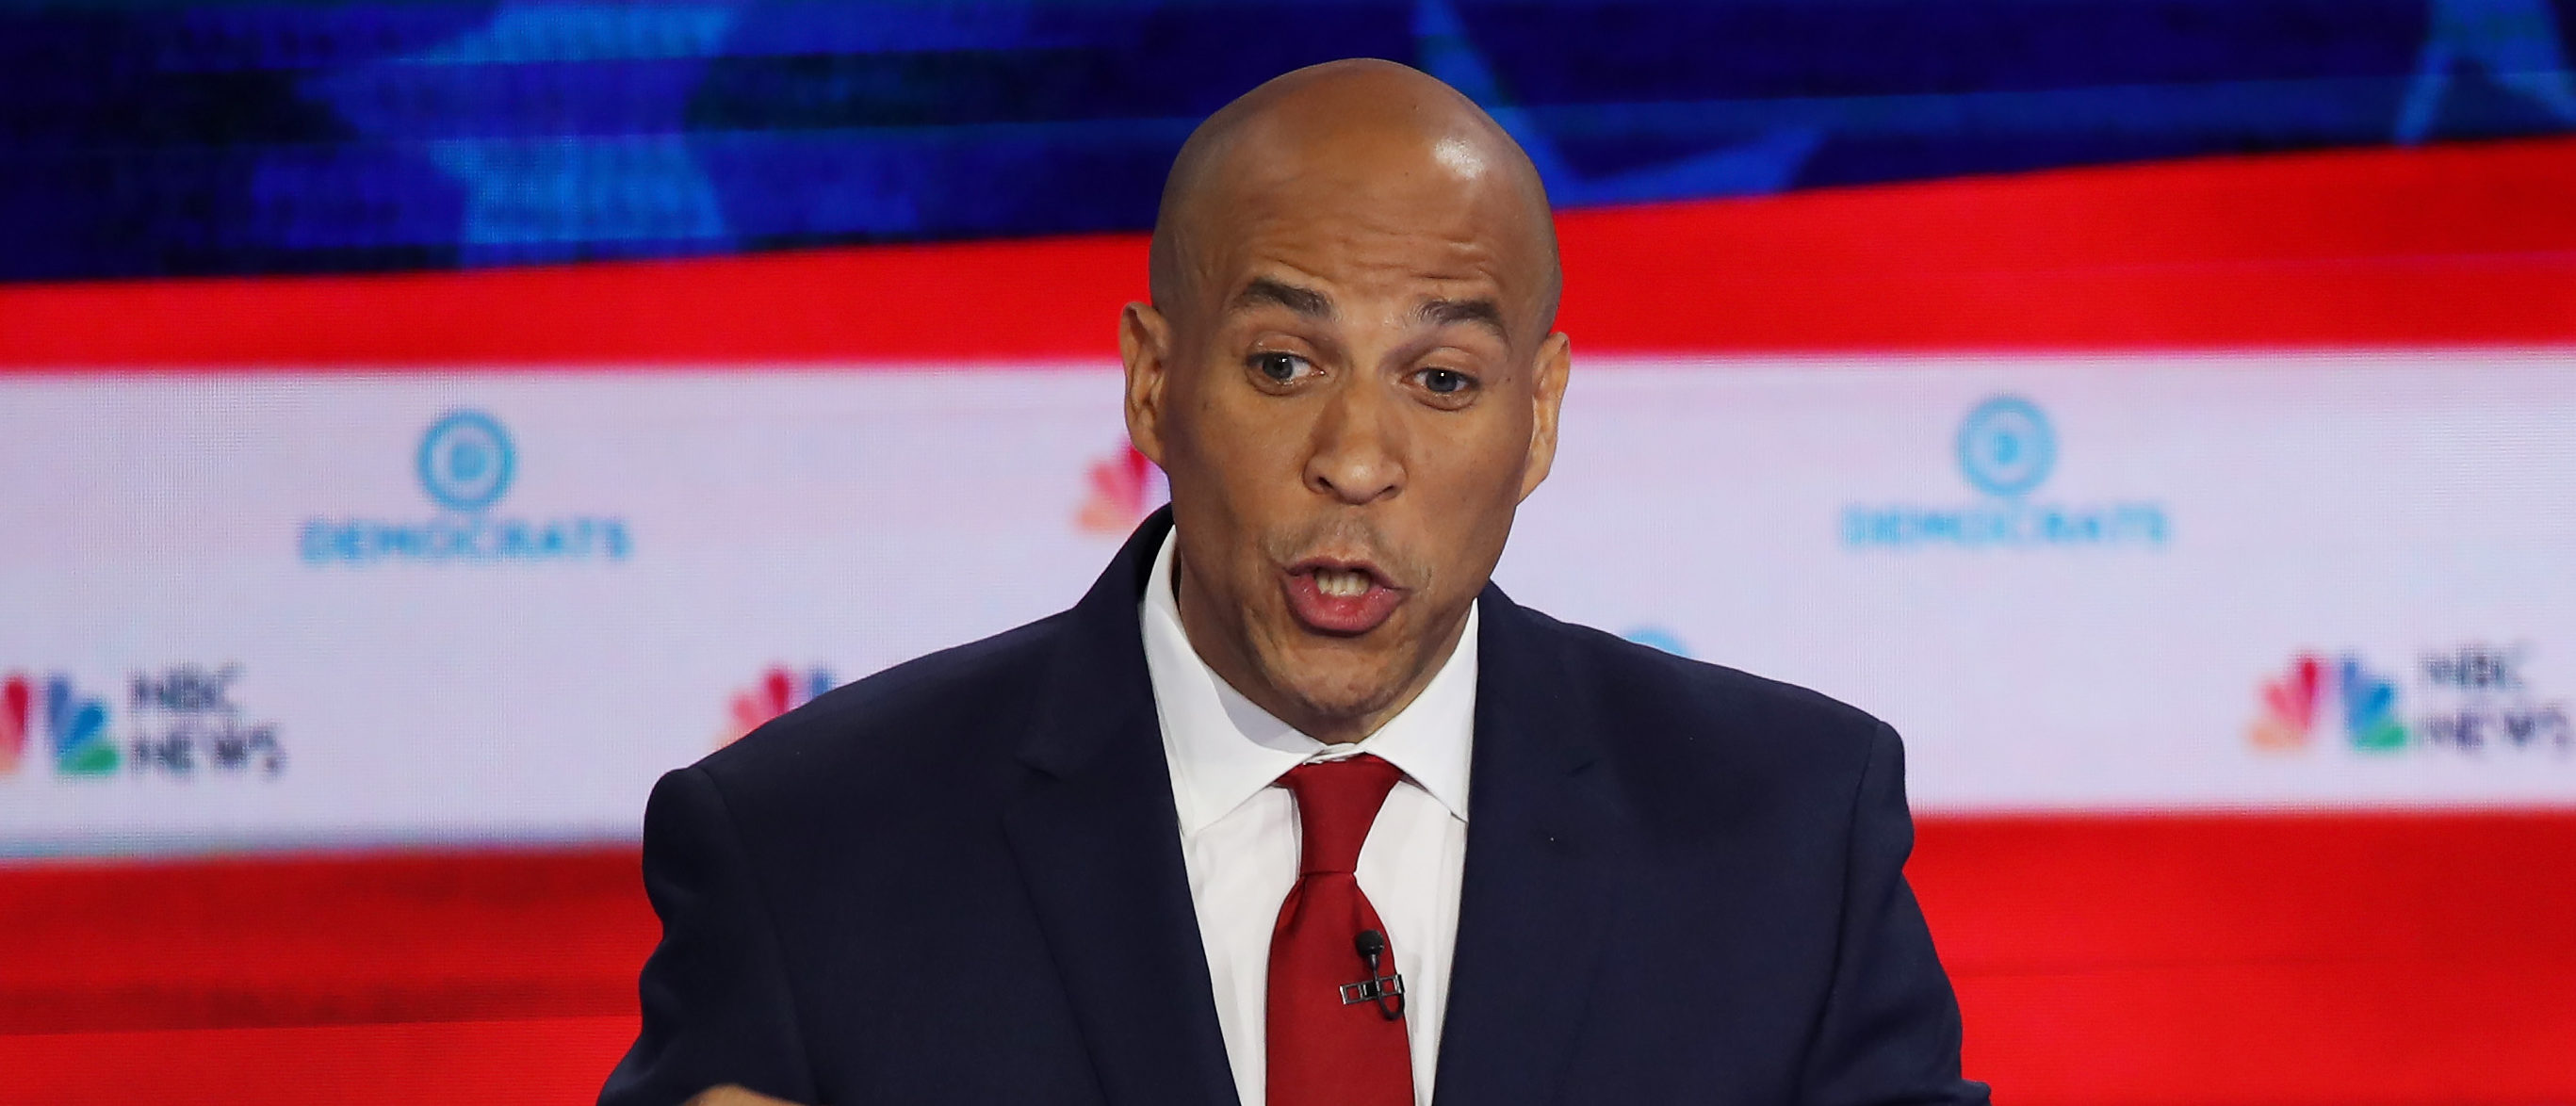 Sen. Cory Booker speaks during the first night of the Democratic presidential debate on June 26, 2019 in Miami. (Photo by Joe Raedle/Getty Images)